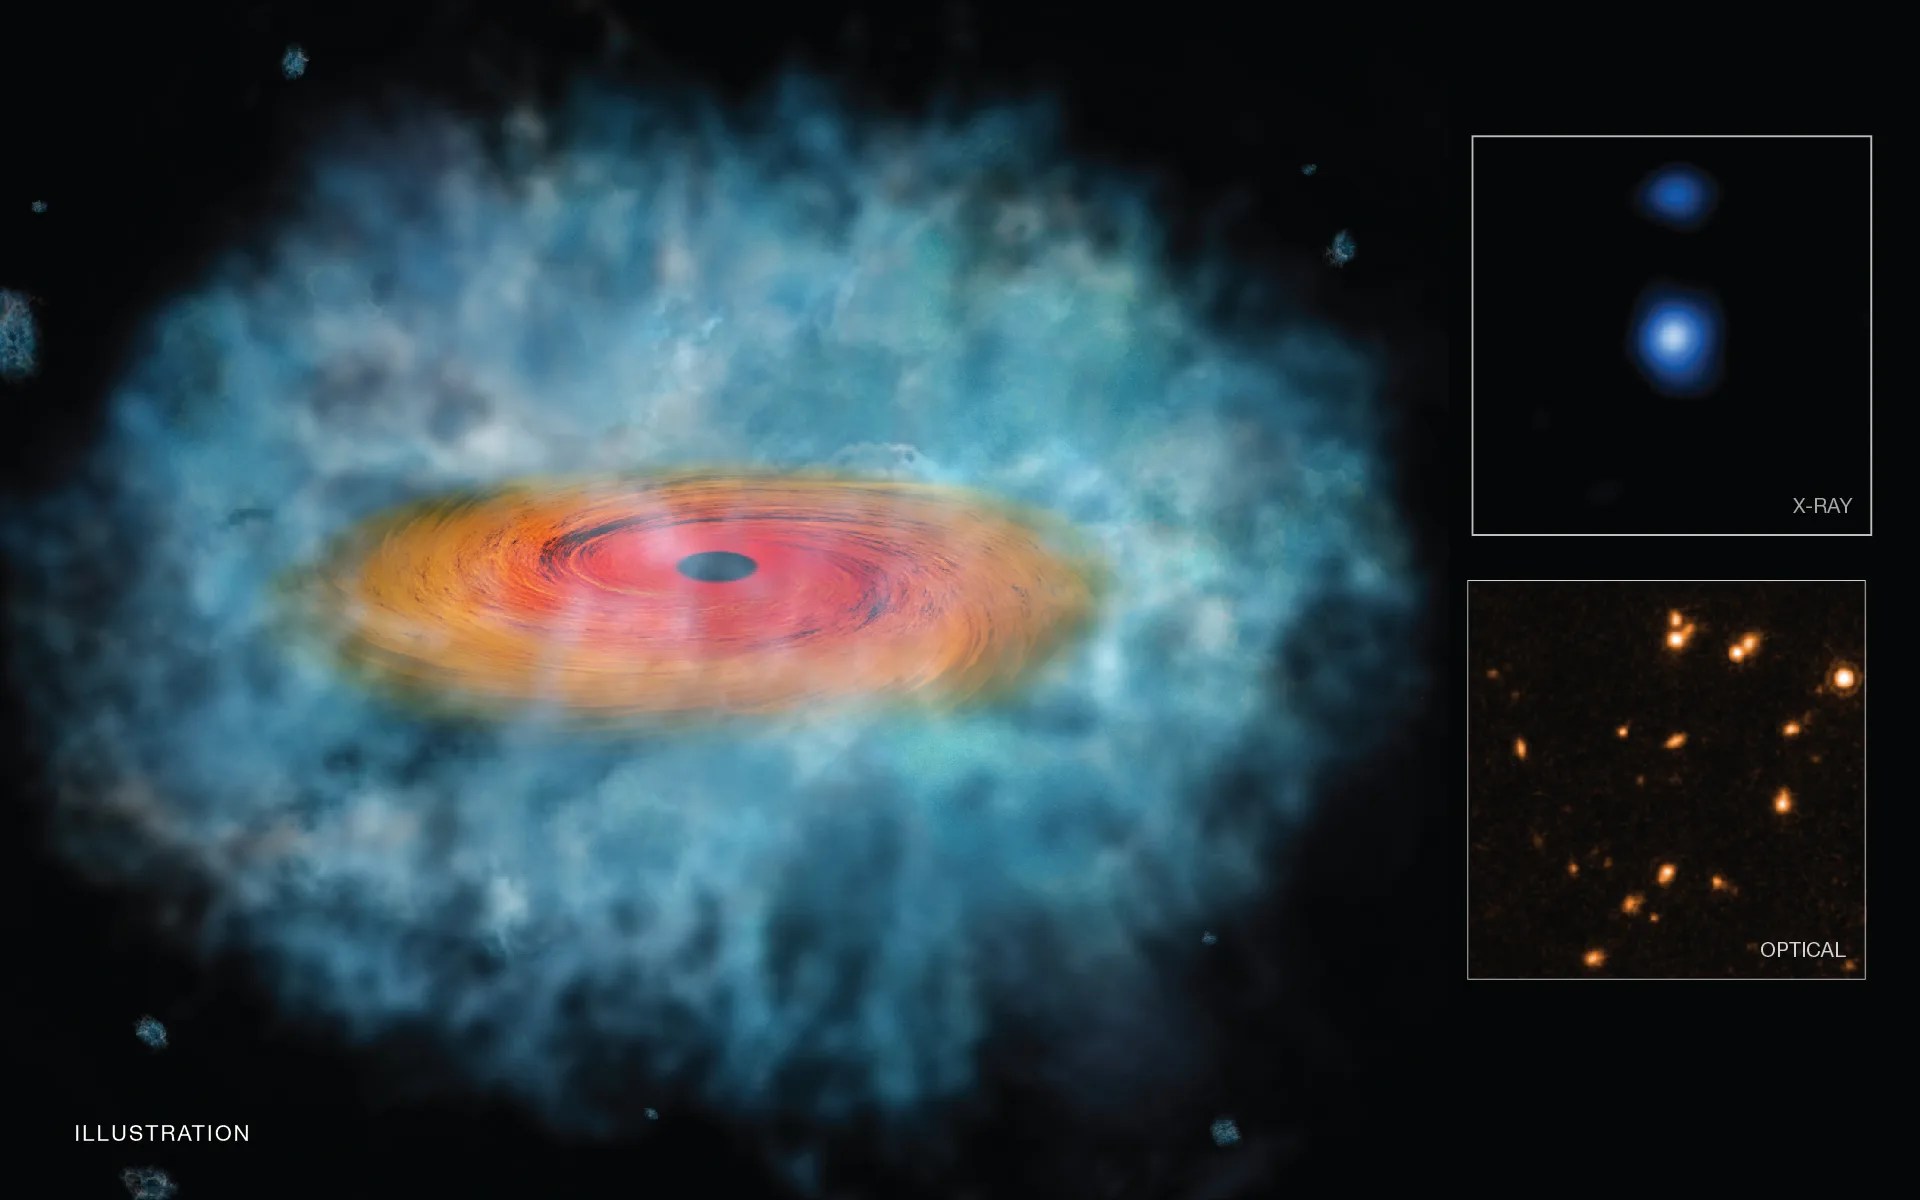 On the left of this image is an illustration of an orange and red swirling disk with a black spot in its center, inside a hazy blue cloud of gas. On the right are two images: An x-ray image showing two hazy blue spots, and an optical image showing multiple bright orange objects.